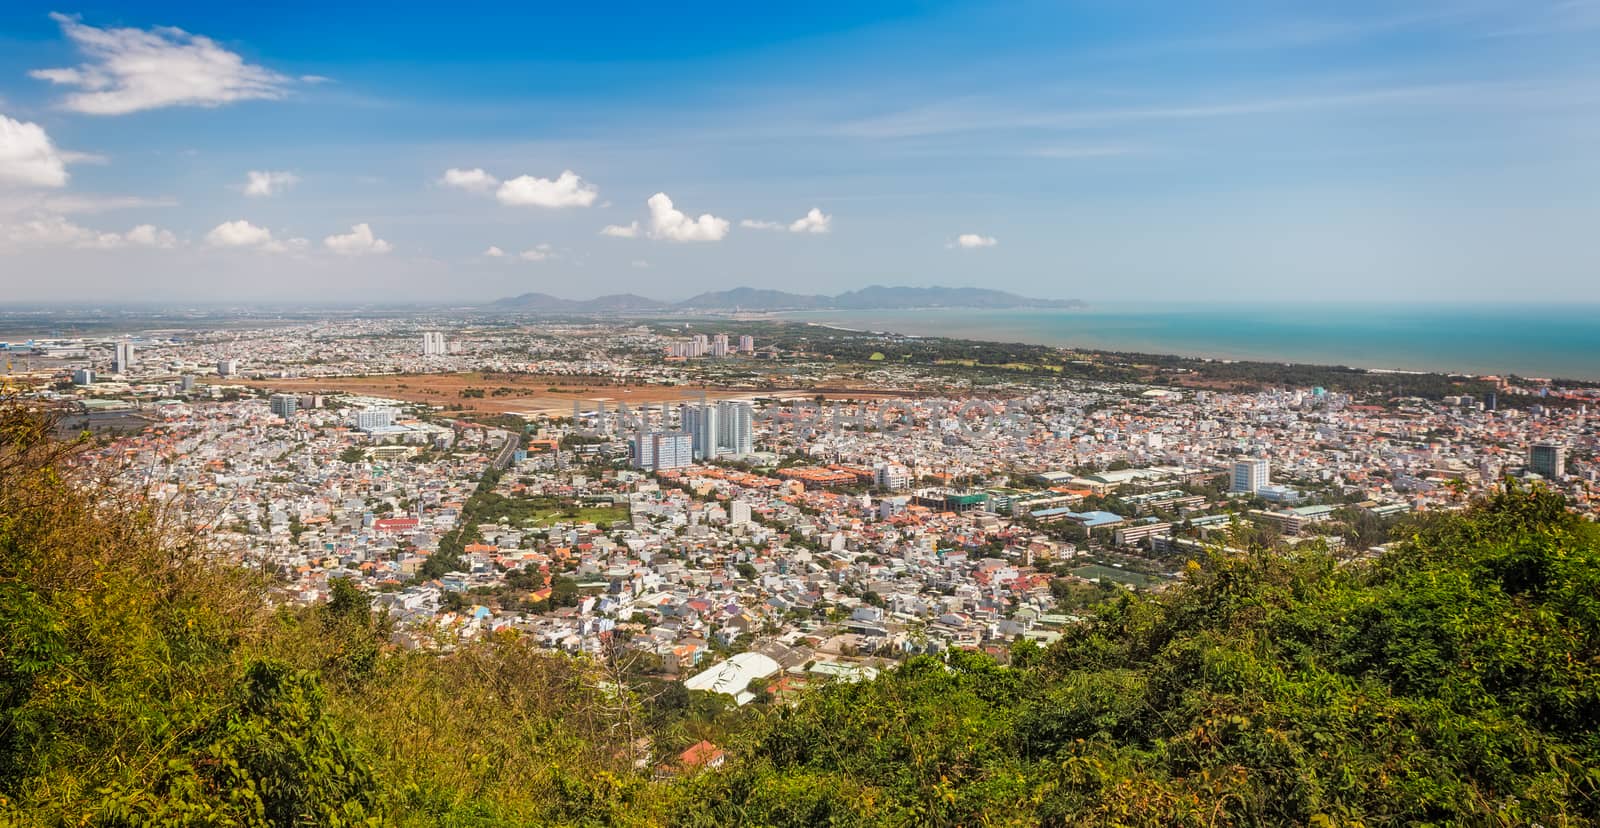 Panoramic view of Vung Tau, Southern Vietnam by fisfra